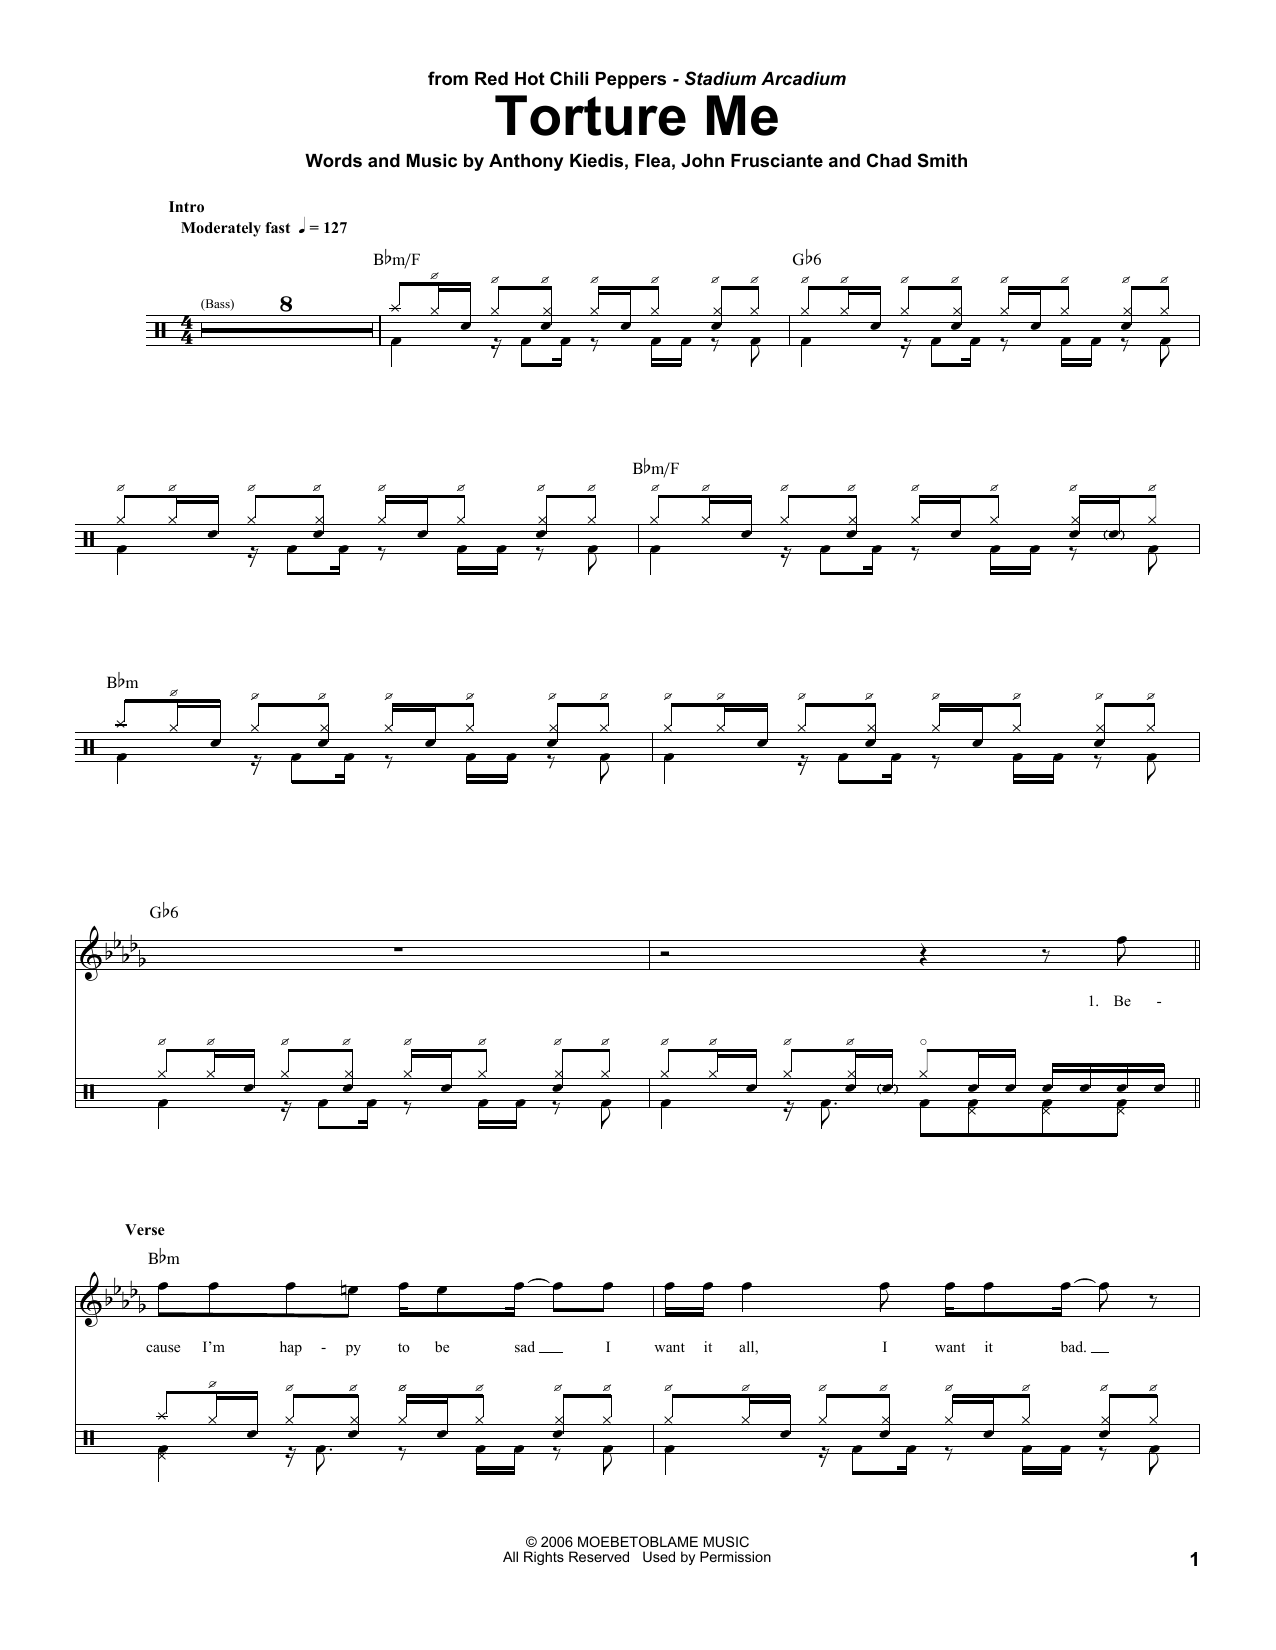 Download Red Hot Chili Peppers Torture Me Sheet Music